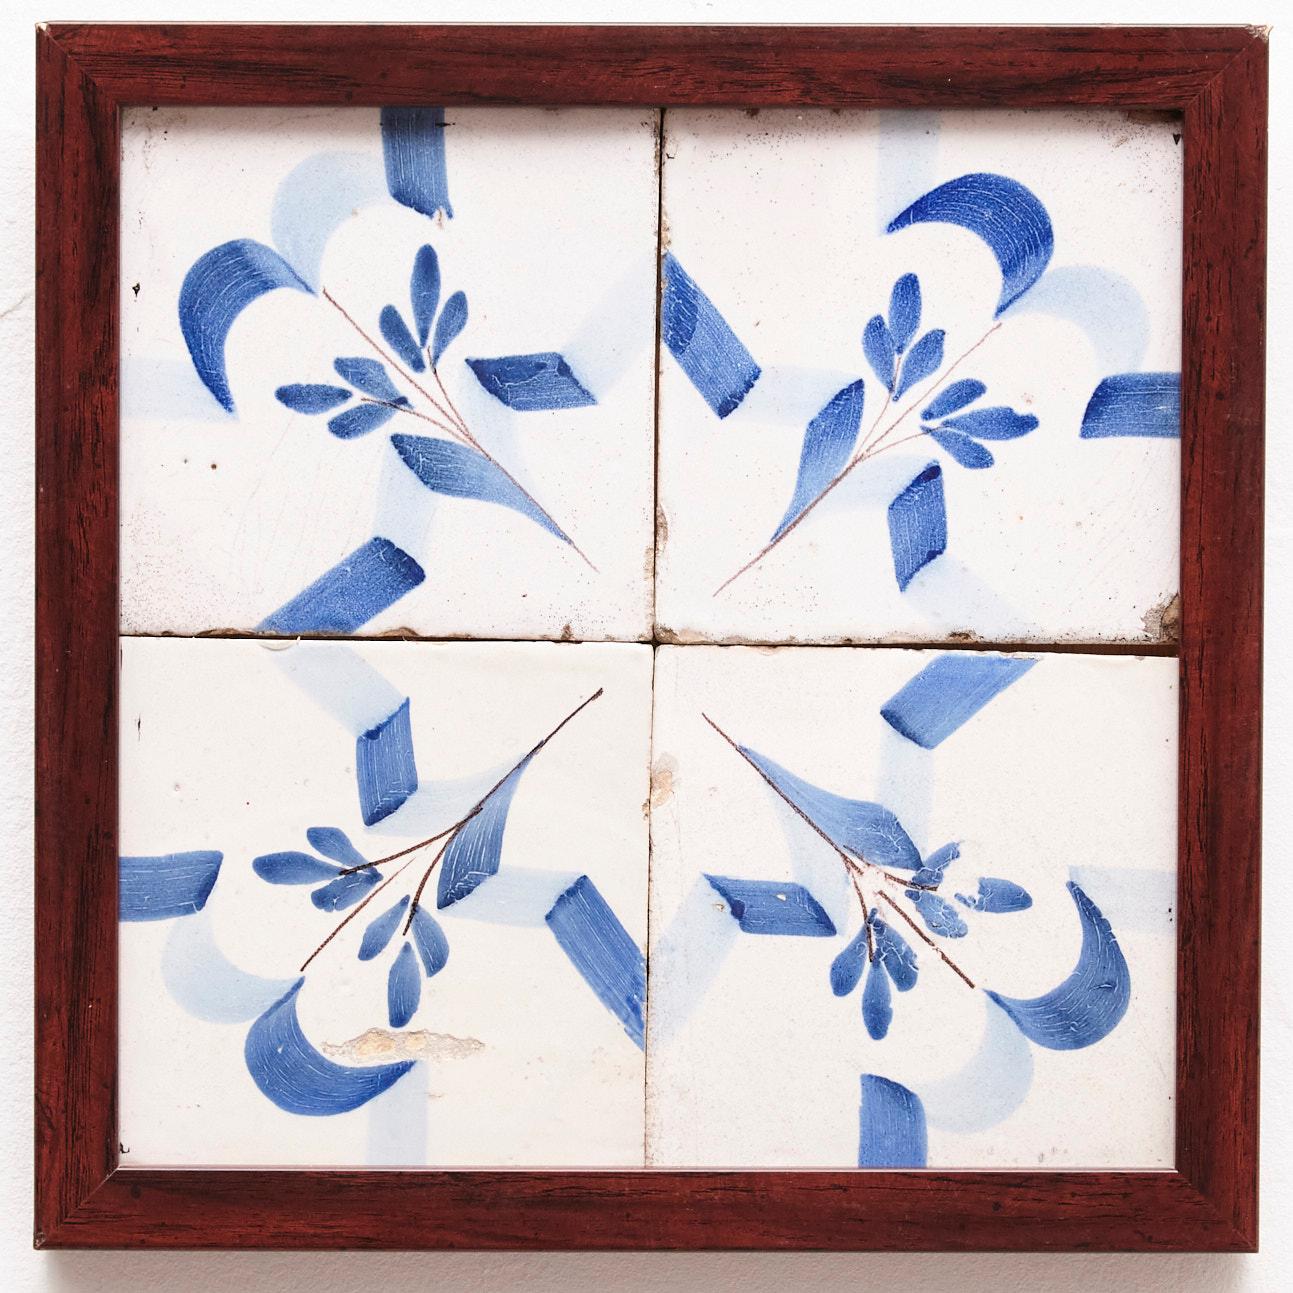 Mid-Century Modern Framed Ceramic Tile Hand Painted Composition, circa 1950